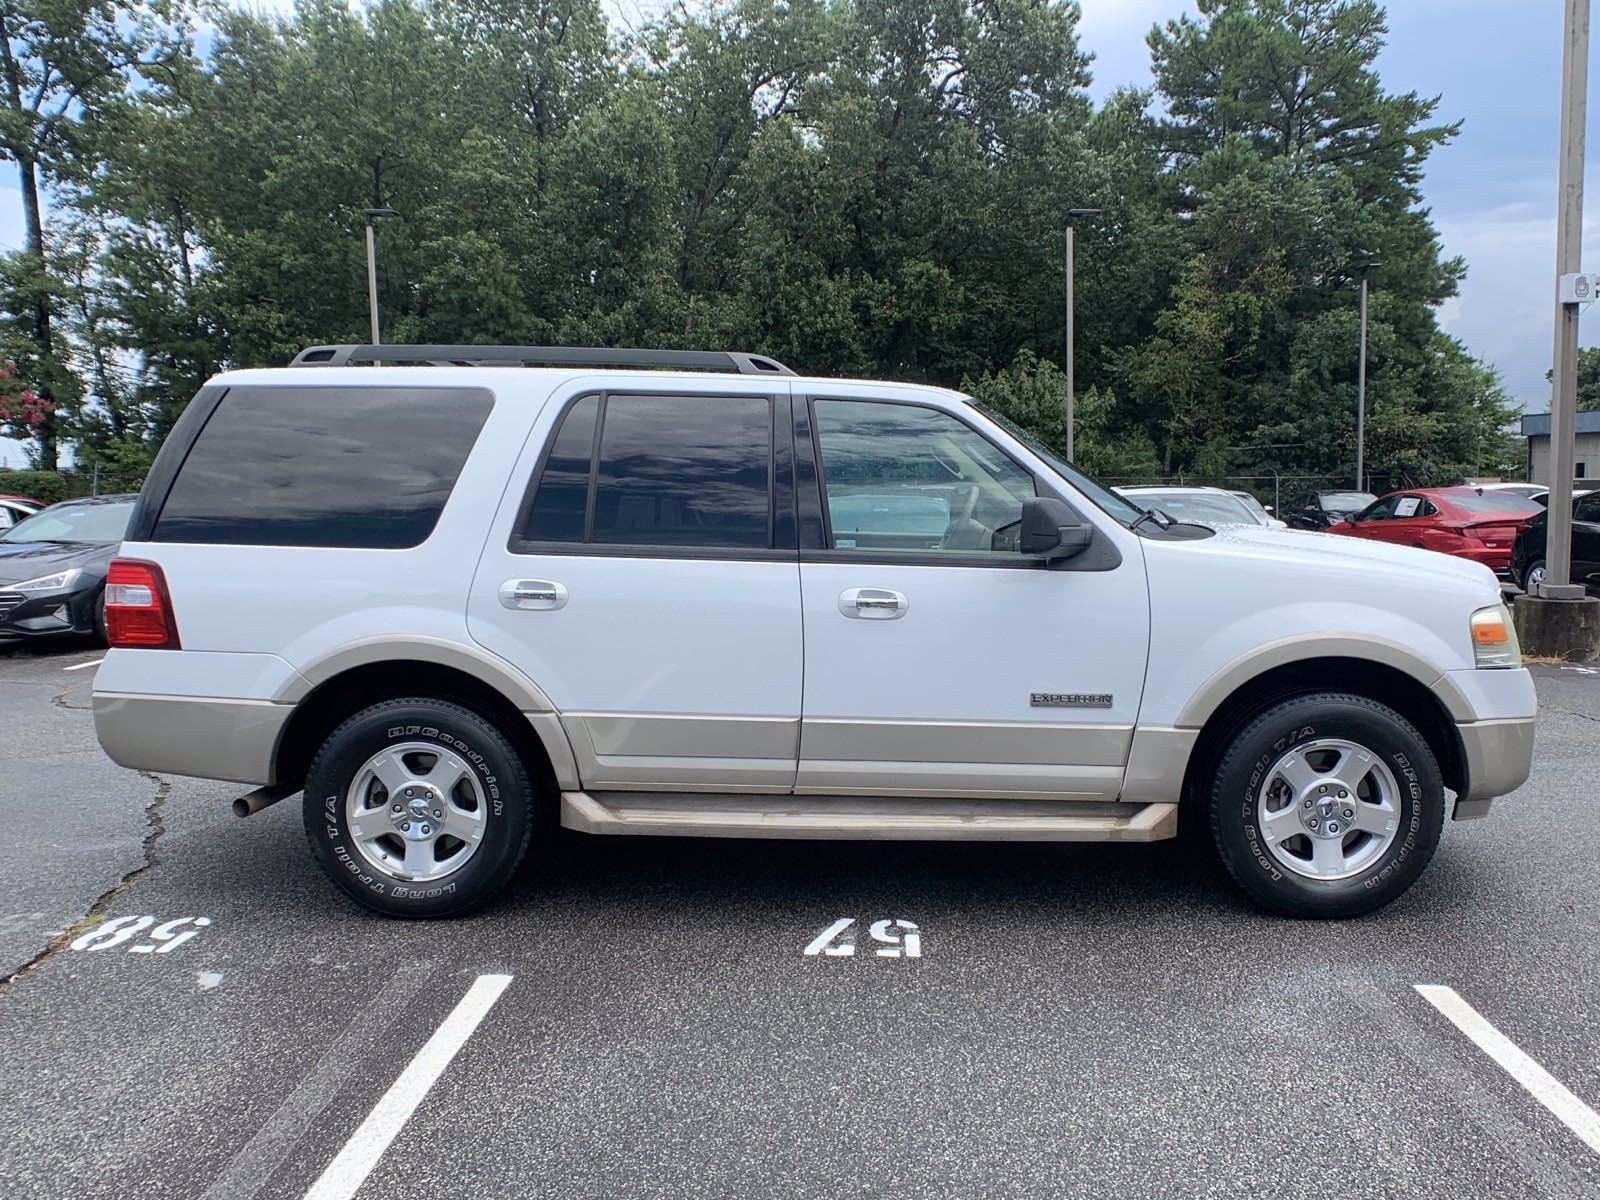 Pre-Owned 2007 Ford Expedition Eddie Bauer Sport Utility in #334038A1 2007 Ford Explorer Eddie Bauer Towing Capacity